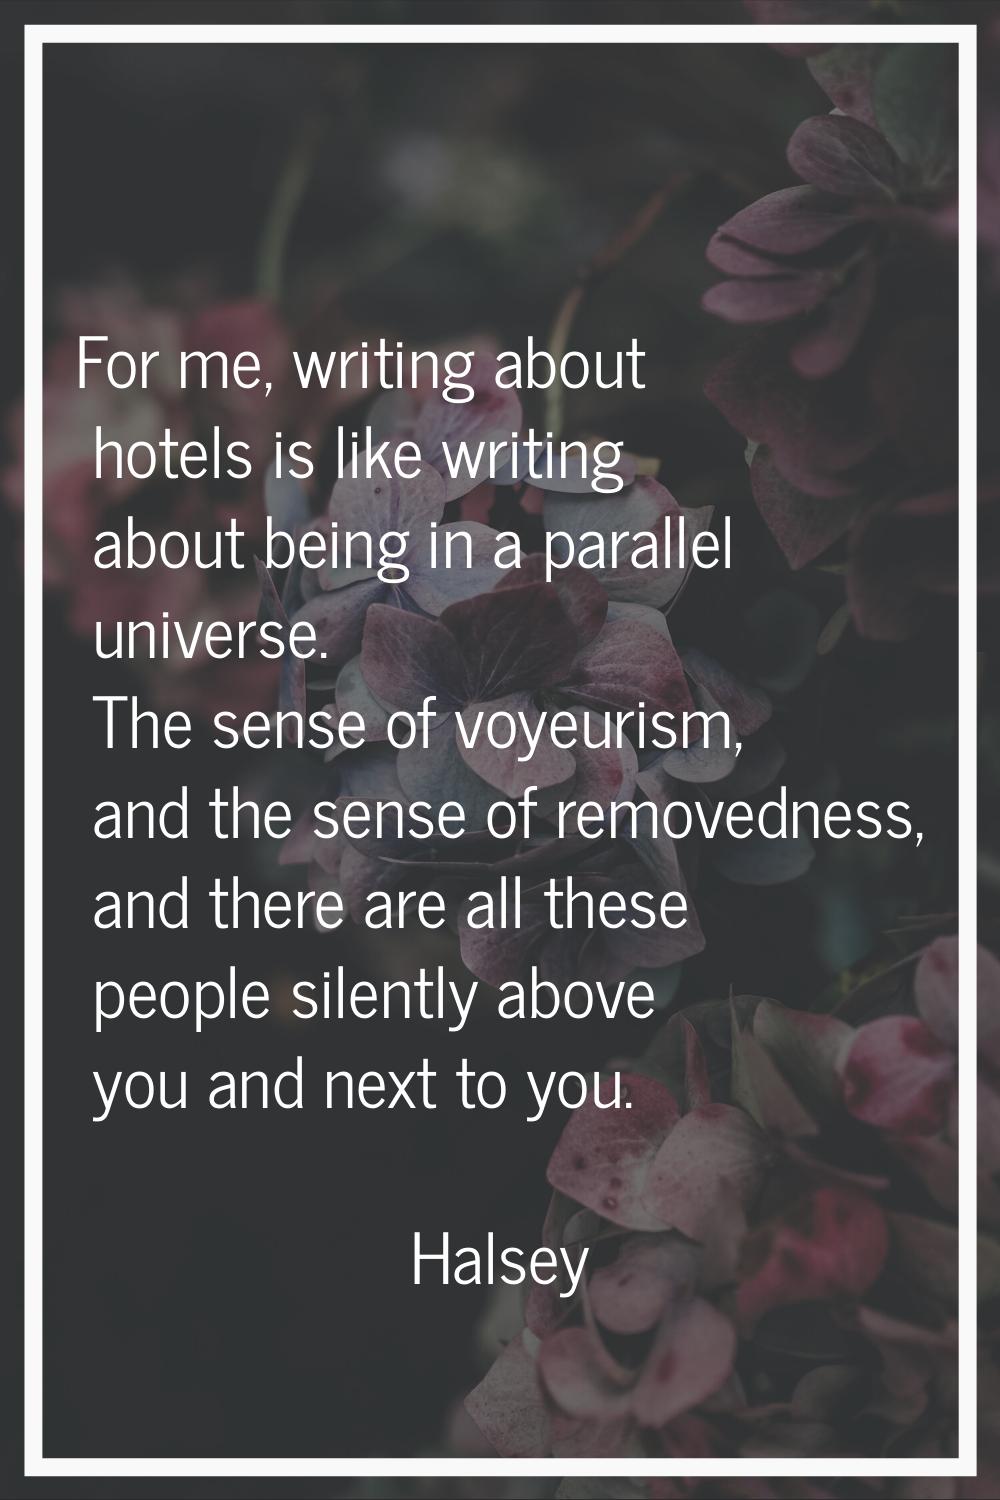 For me, writing about hotels is like writing about being in a parallel universe. The sense of voyeu